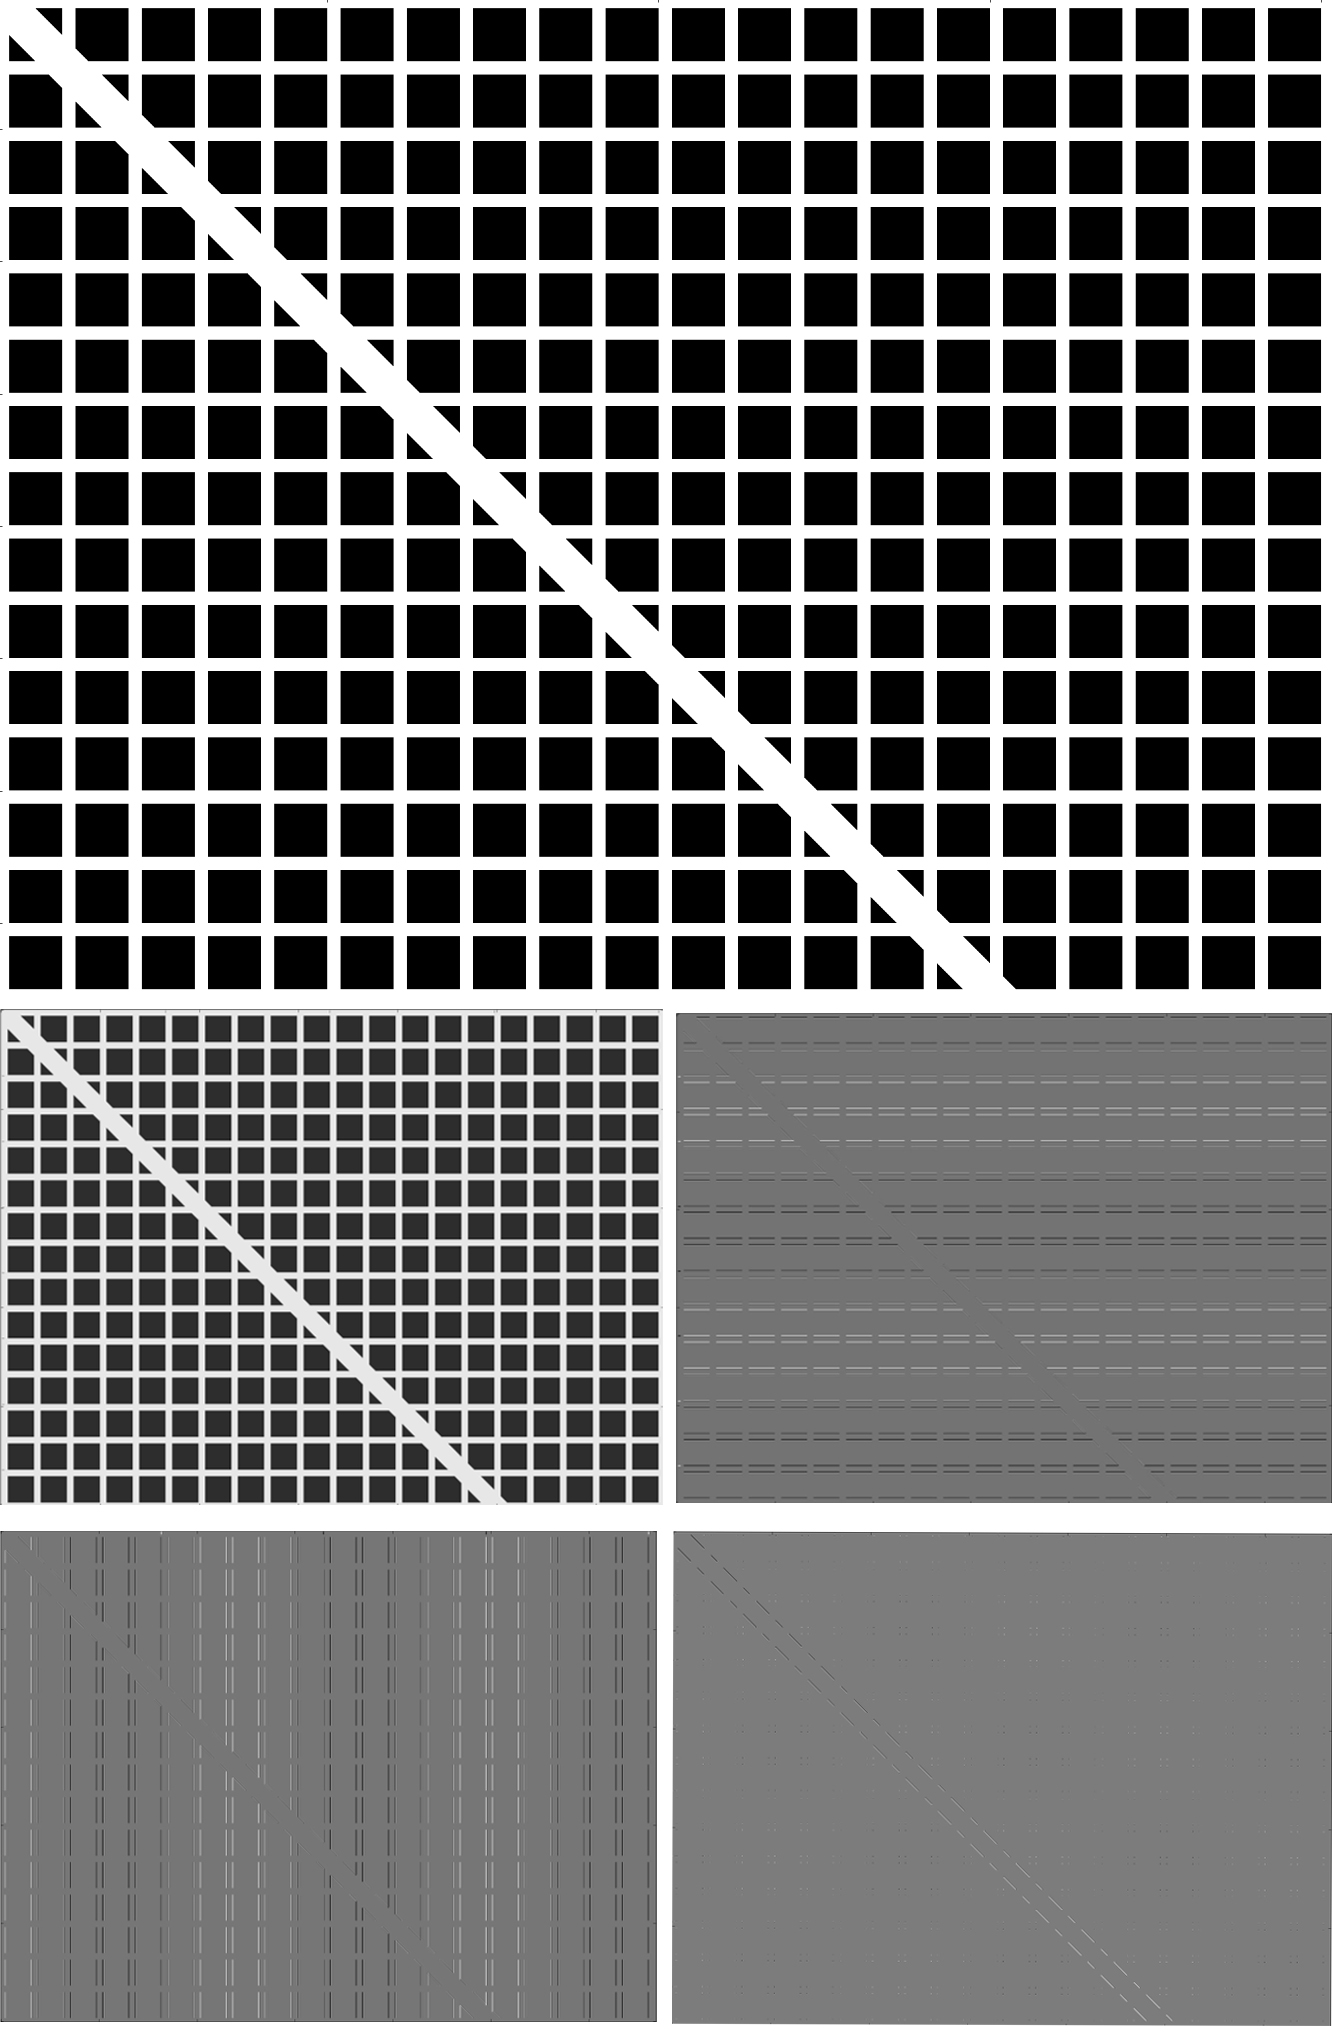 The original image (top, 996×1332 pixels) is transformed using function c09ea into the four coefficient (approximation, horizontal, vertical and diagonal) matrices (501×669) displayed below the original. The transformation was performed using the Daubechies wavelet with four vanishing moments and half-point end extension. Note that the approximation coefficients are a very close representation of the original image, while the horizontal, vertical and diagonal features of the image are visible in the respective coefficient matrices.